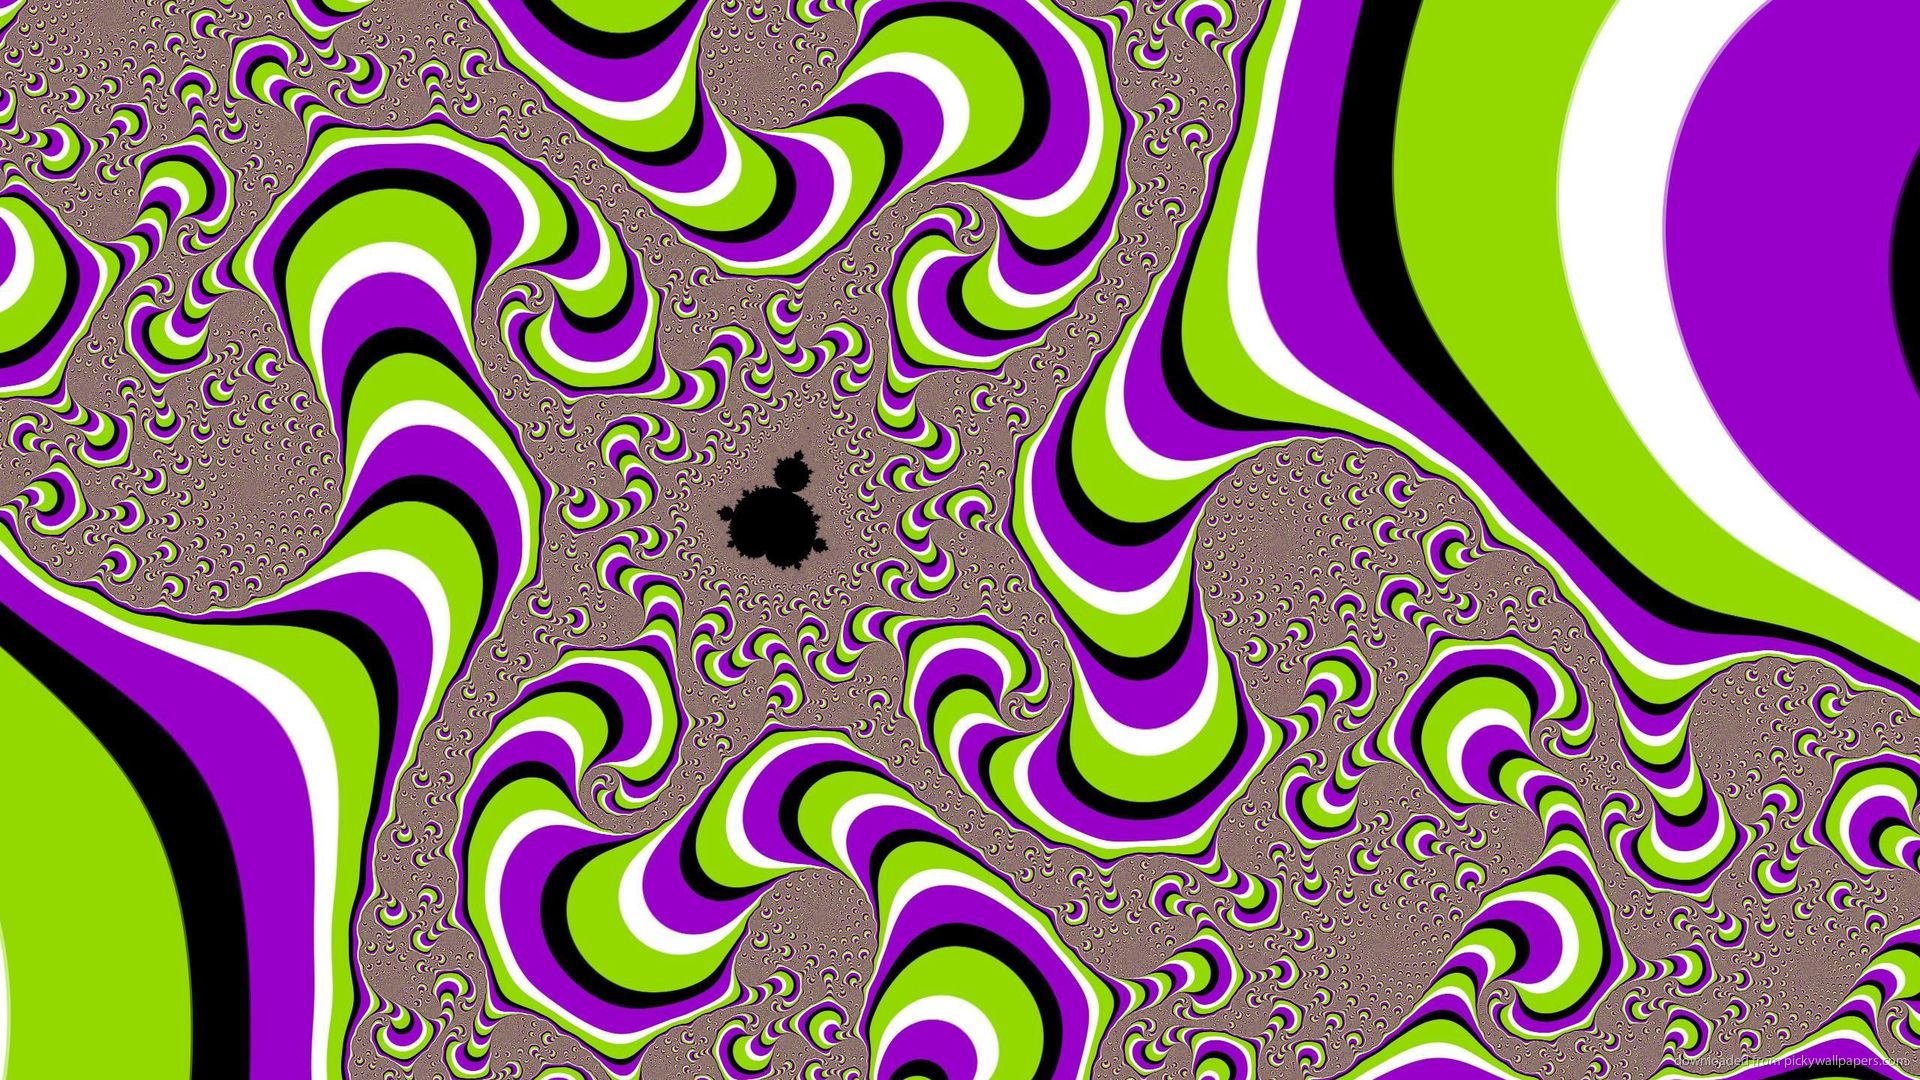 HD Insane Illusion Wallpaper For Your